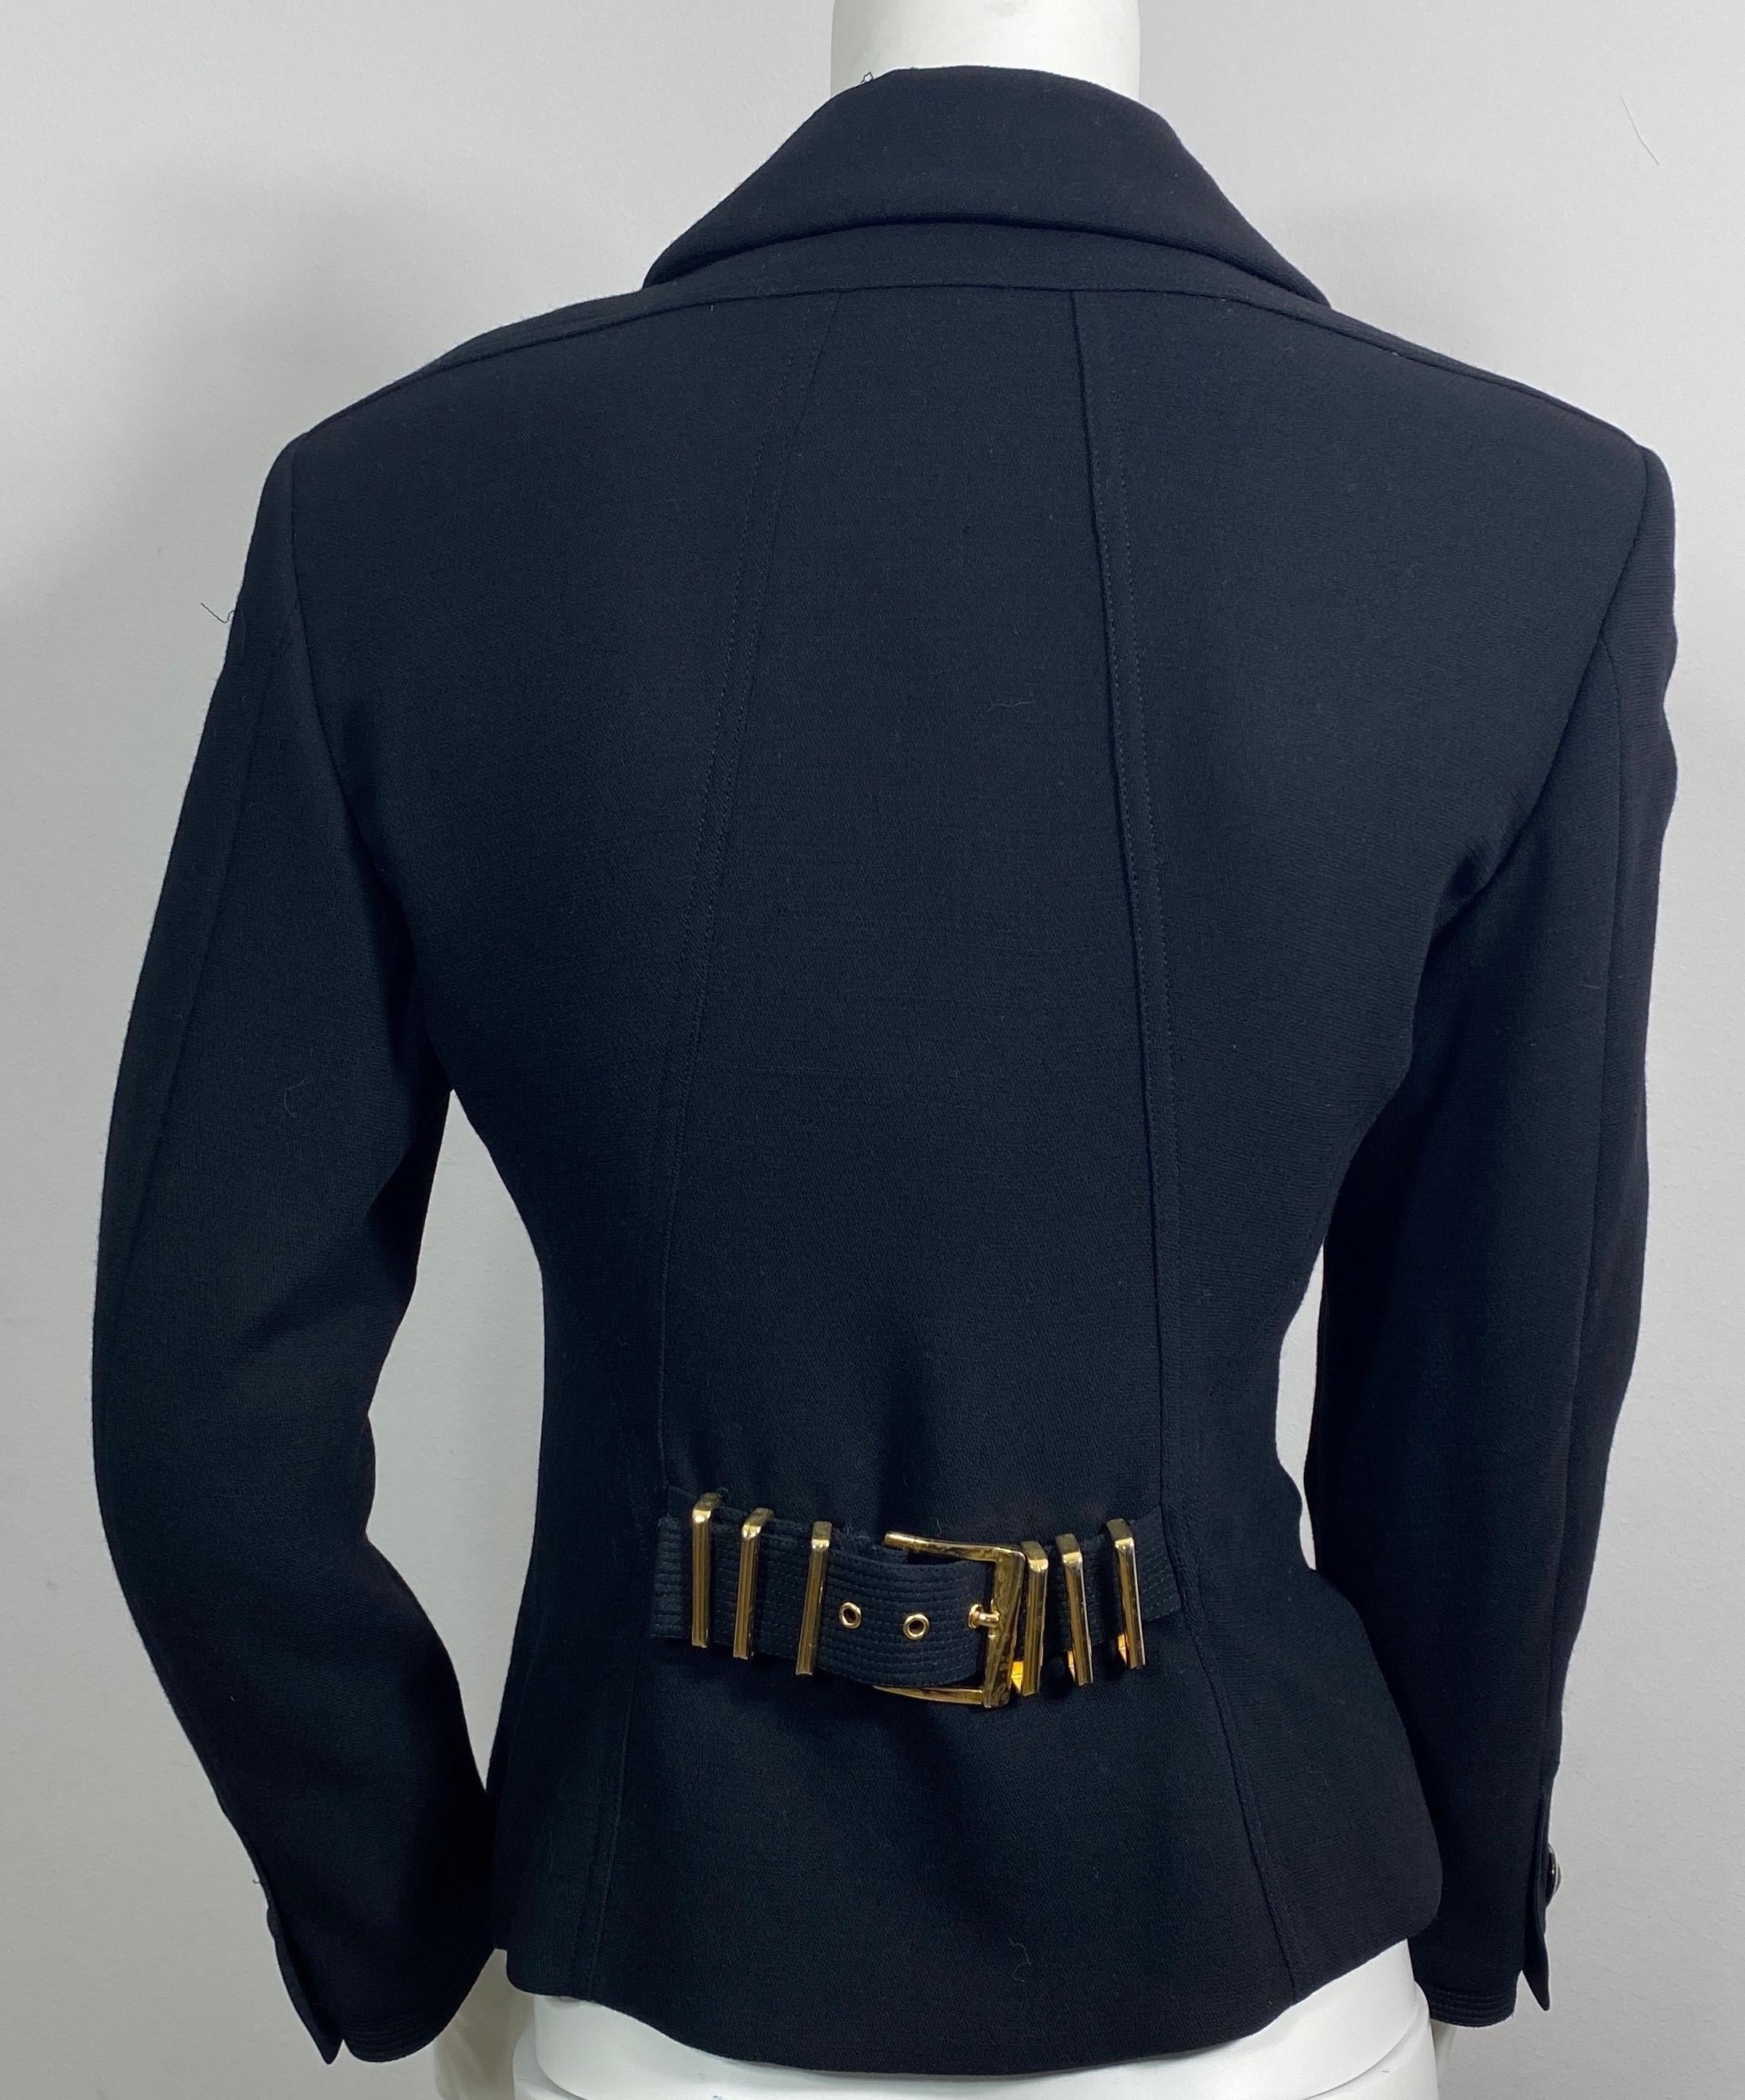 Gianni Versace Couture F/W 1992 Runway S&M Bondage Black Jacket-Size 6 For Sale 5